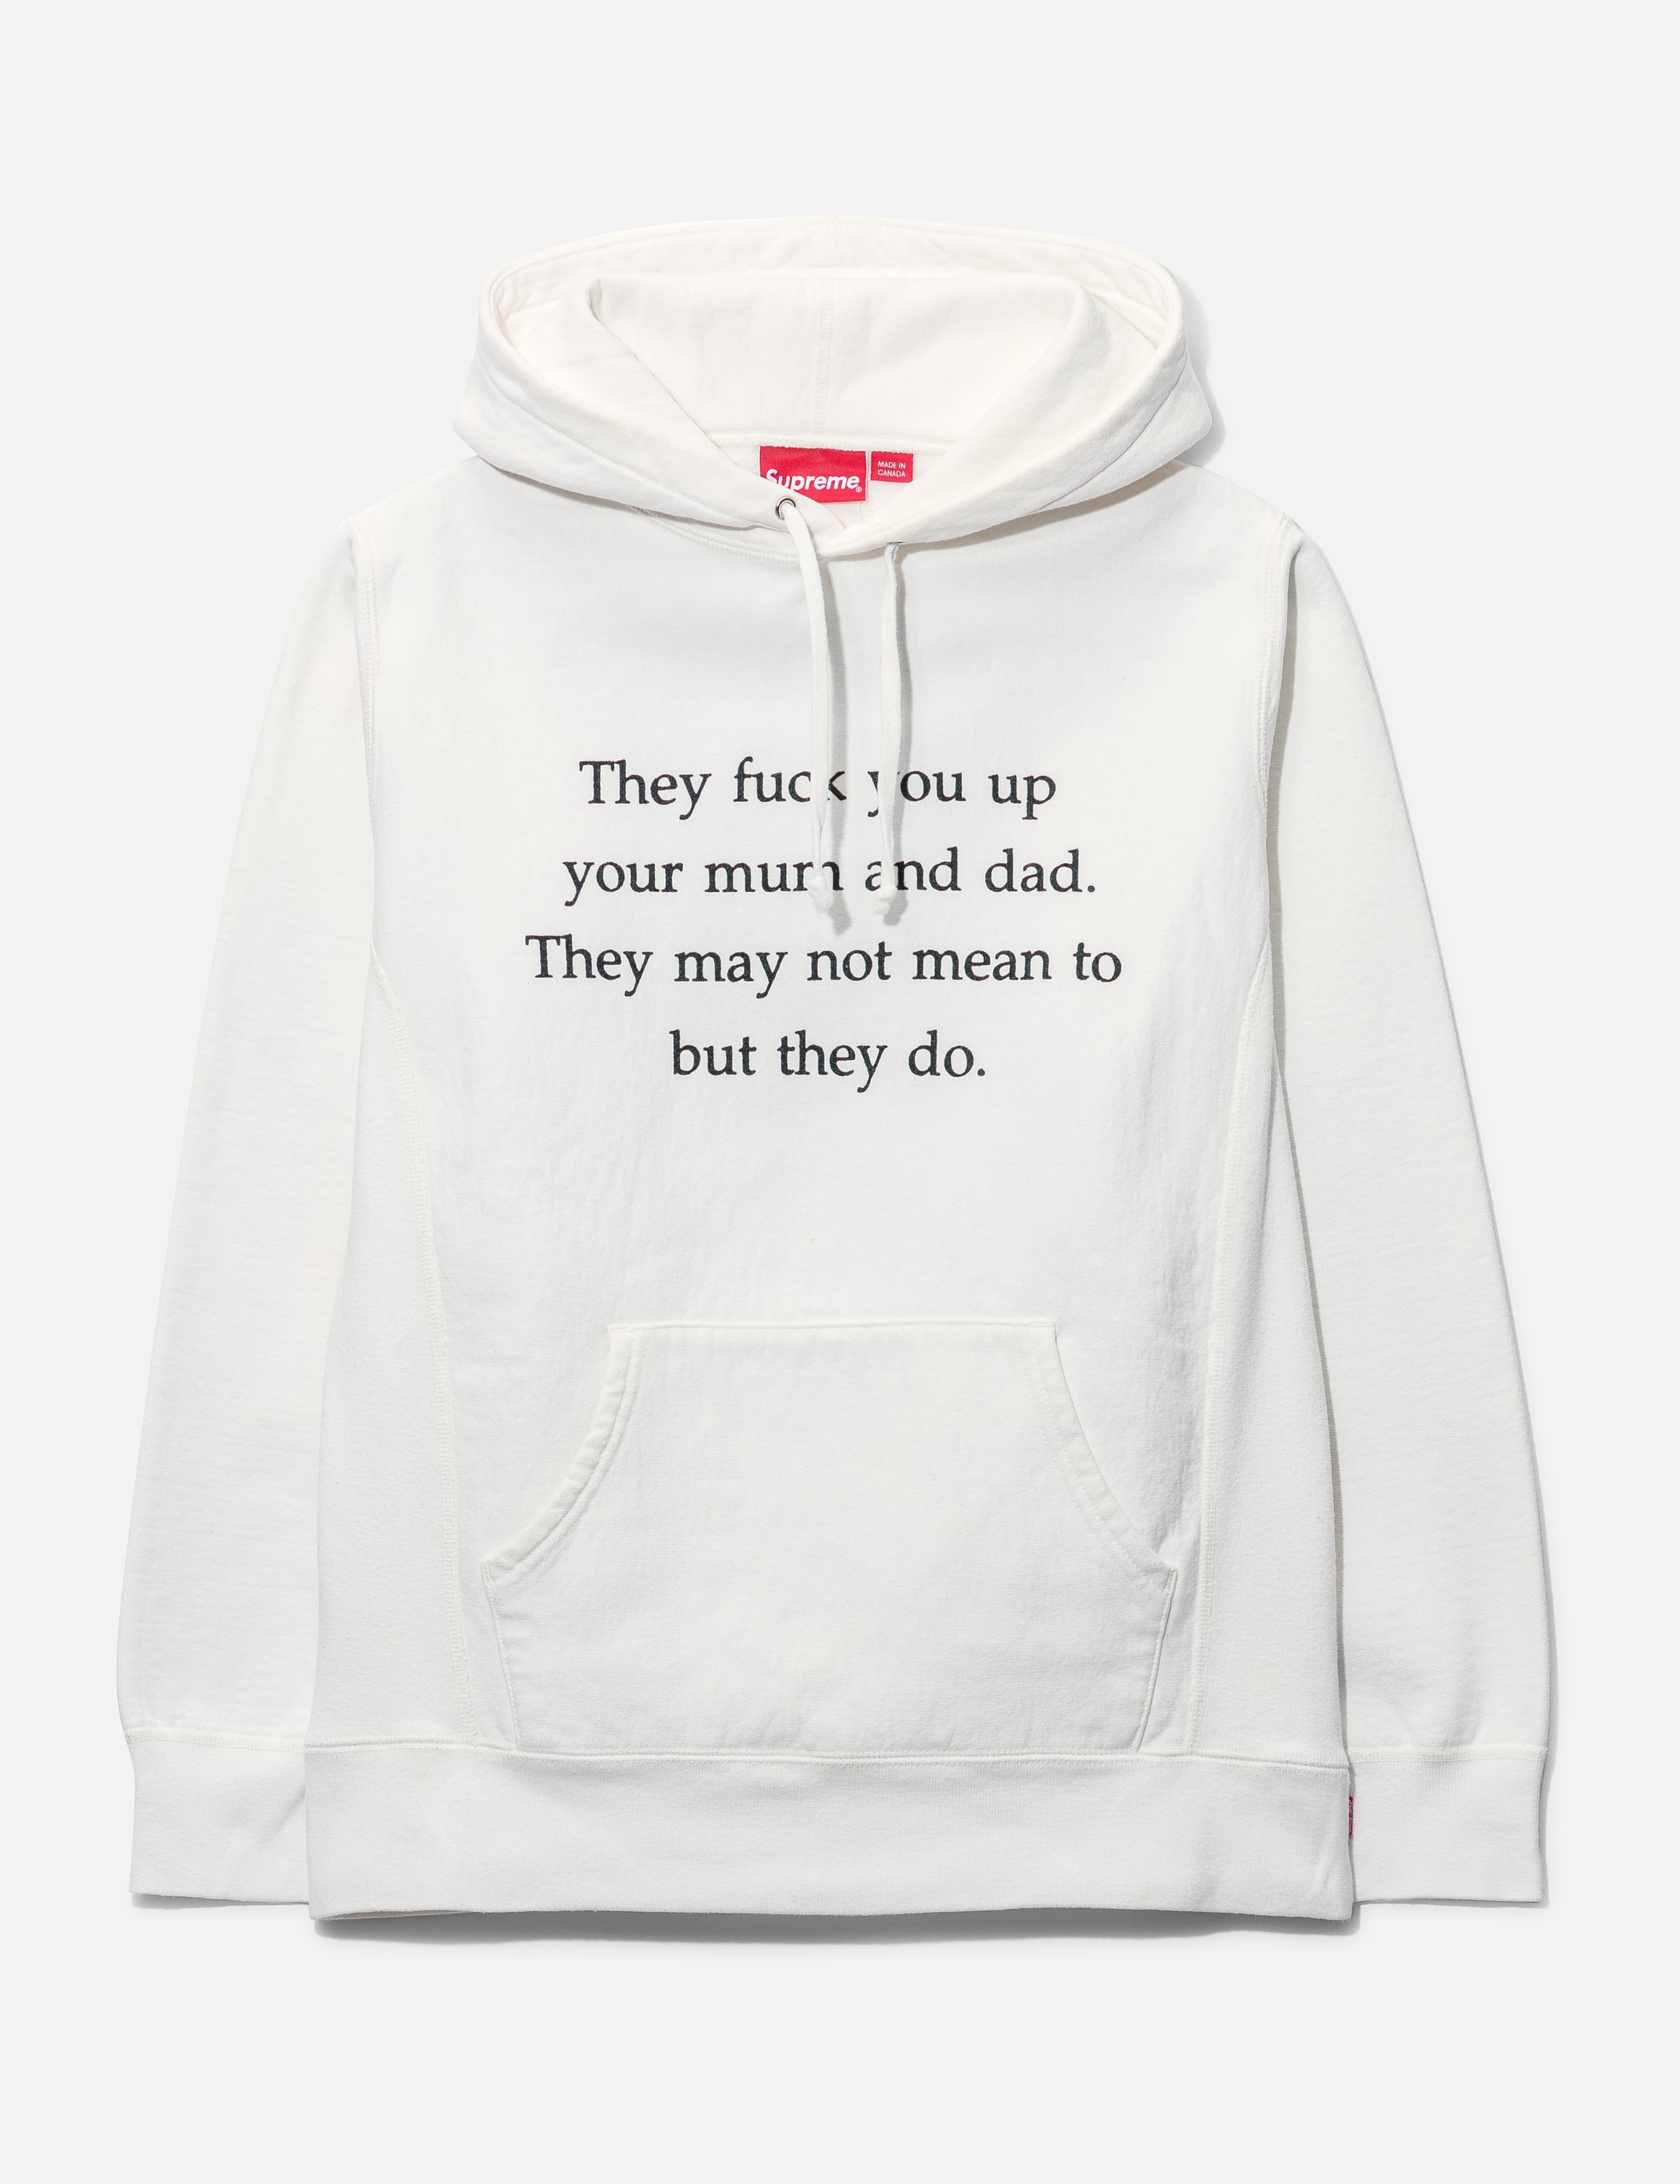 Verdy - VERDY DOVER STREET MARKET HOODIE | HBX - Globally Curated 